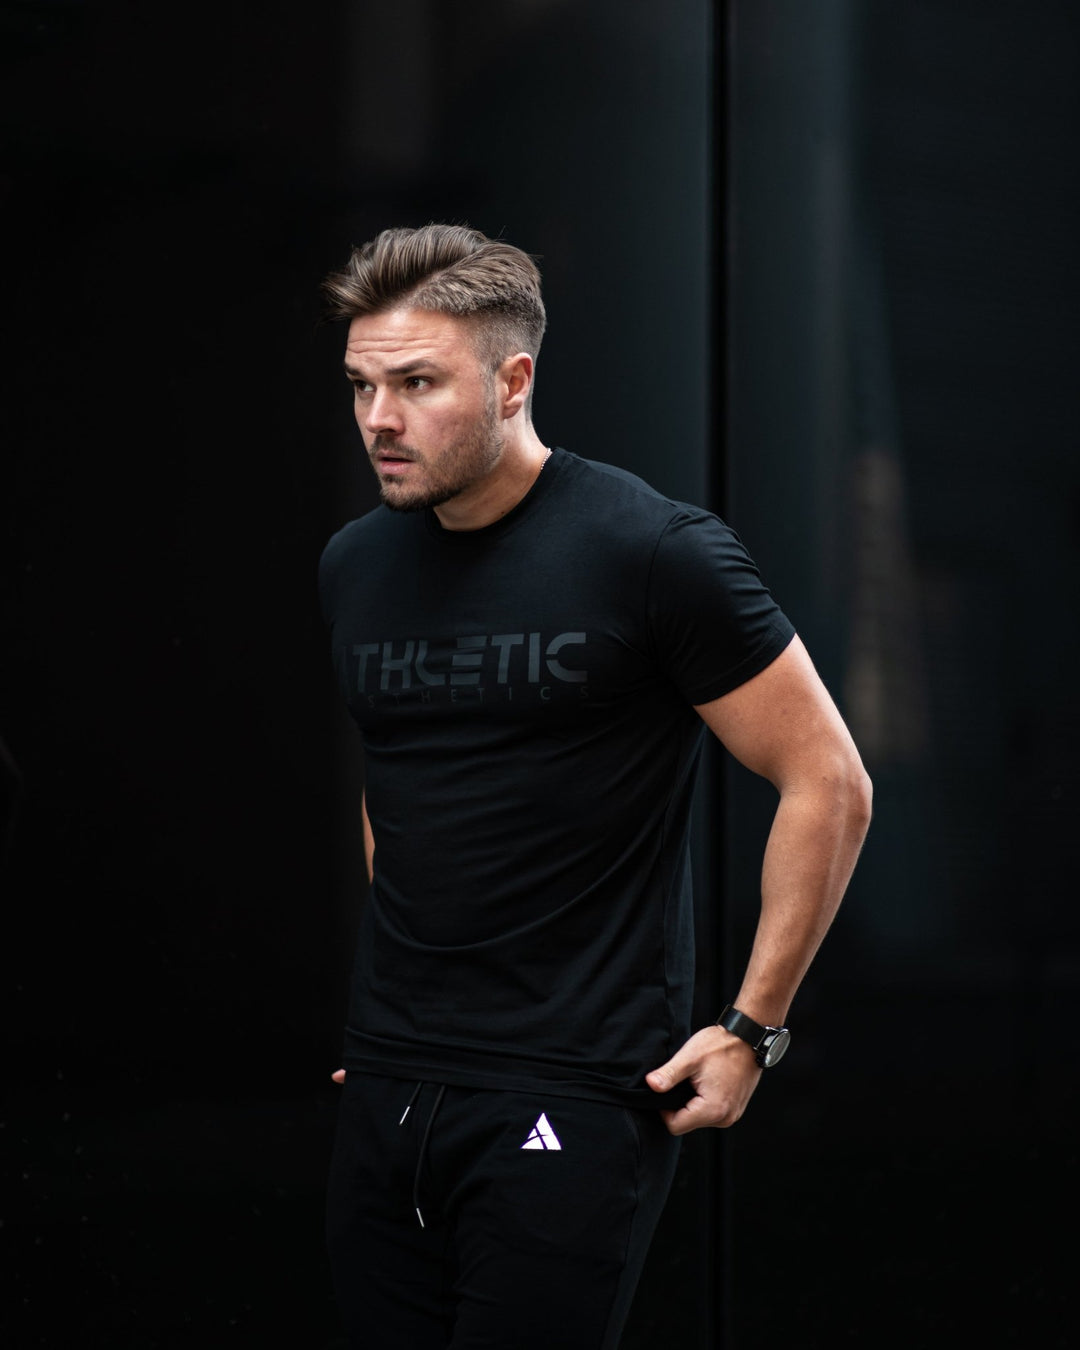 Classic Fit (Shadow) - Athletic Aesthetics